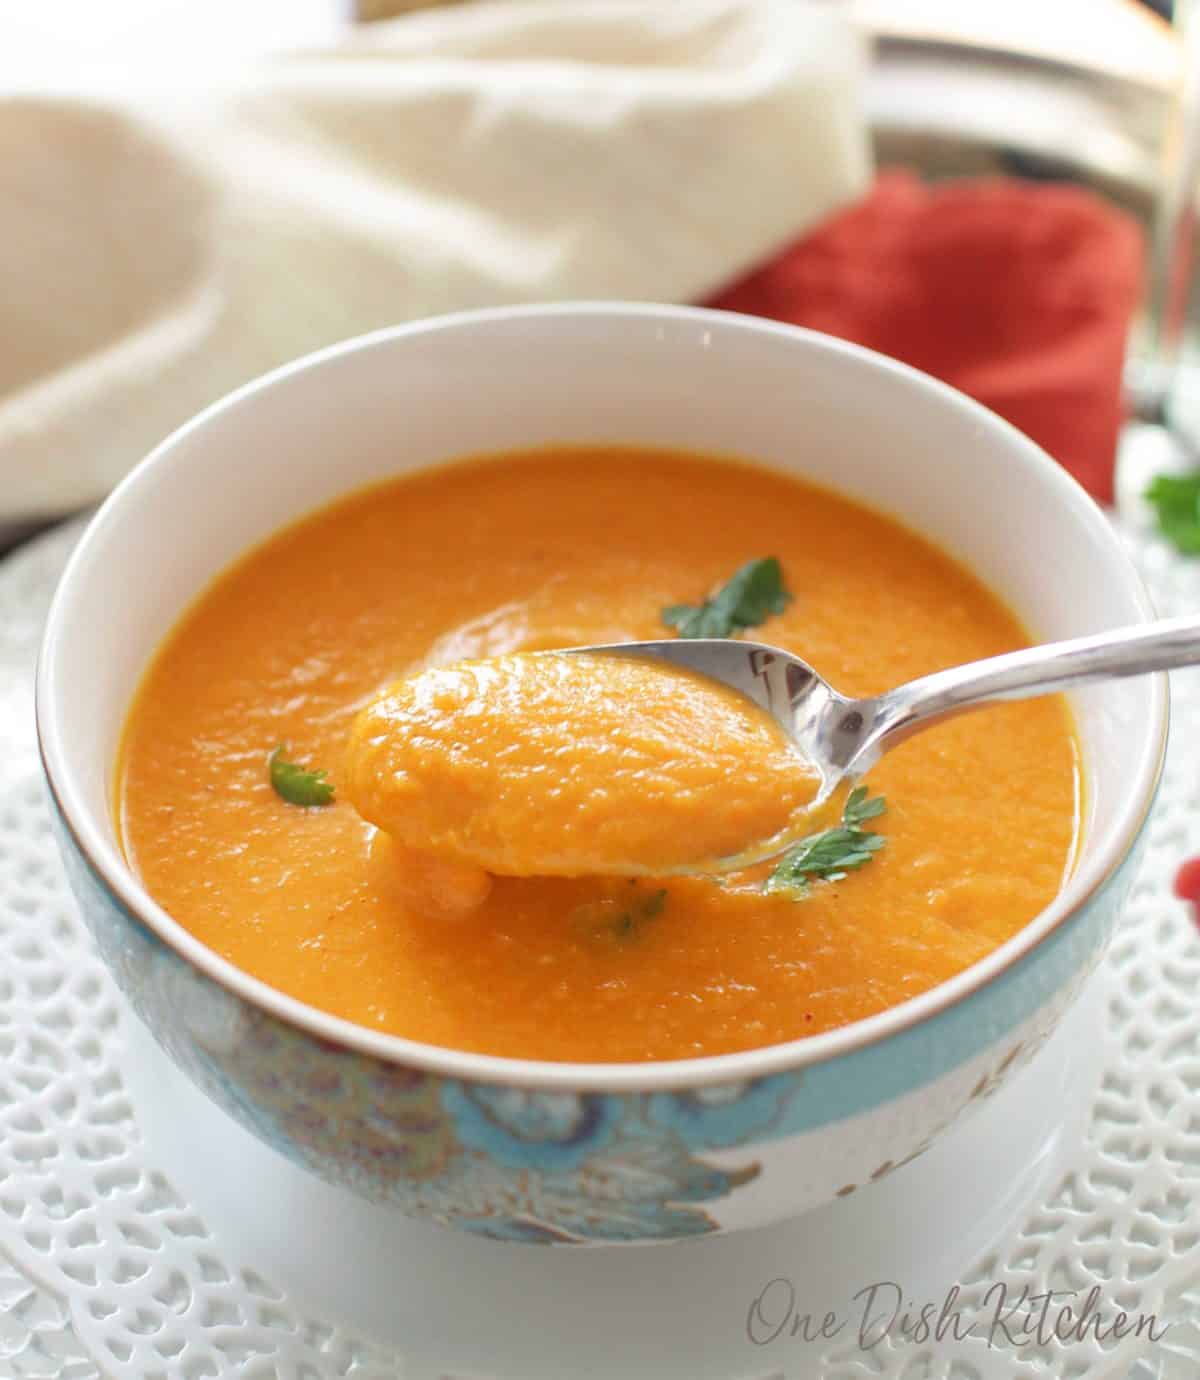 A closeup of a spoonful of carrot soup garnished with cilantro.